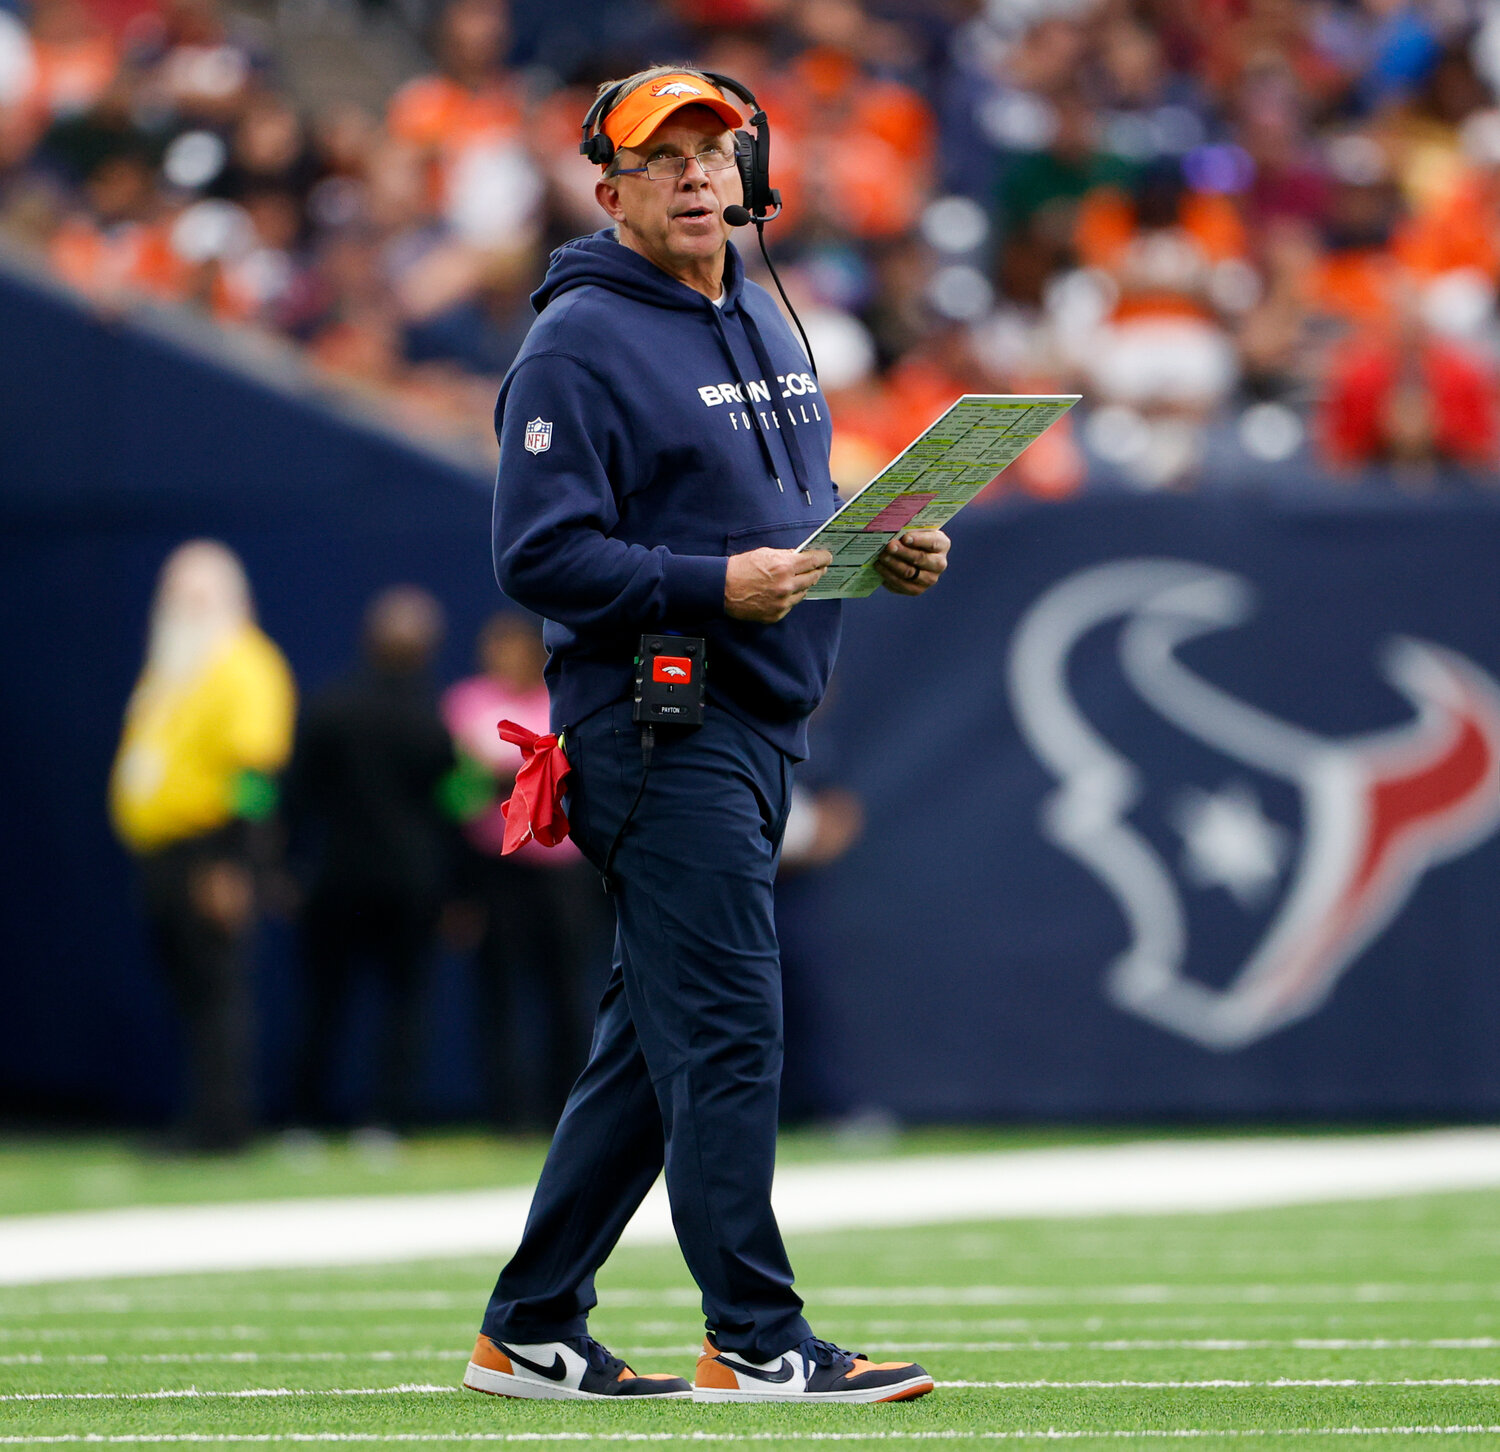 Broncos head coach Sean Payton looks up at the video board during a timeout in an NFL game between the Texans and the Broncos on December 3, 2023 in Houston. The Texans won, 22-17.